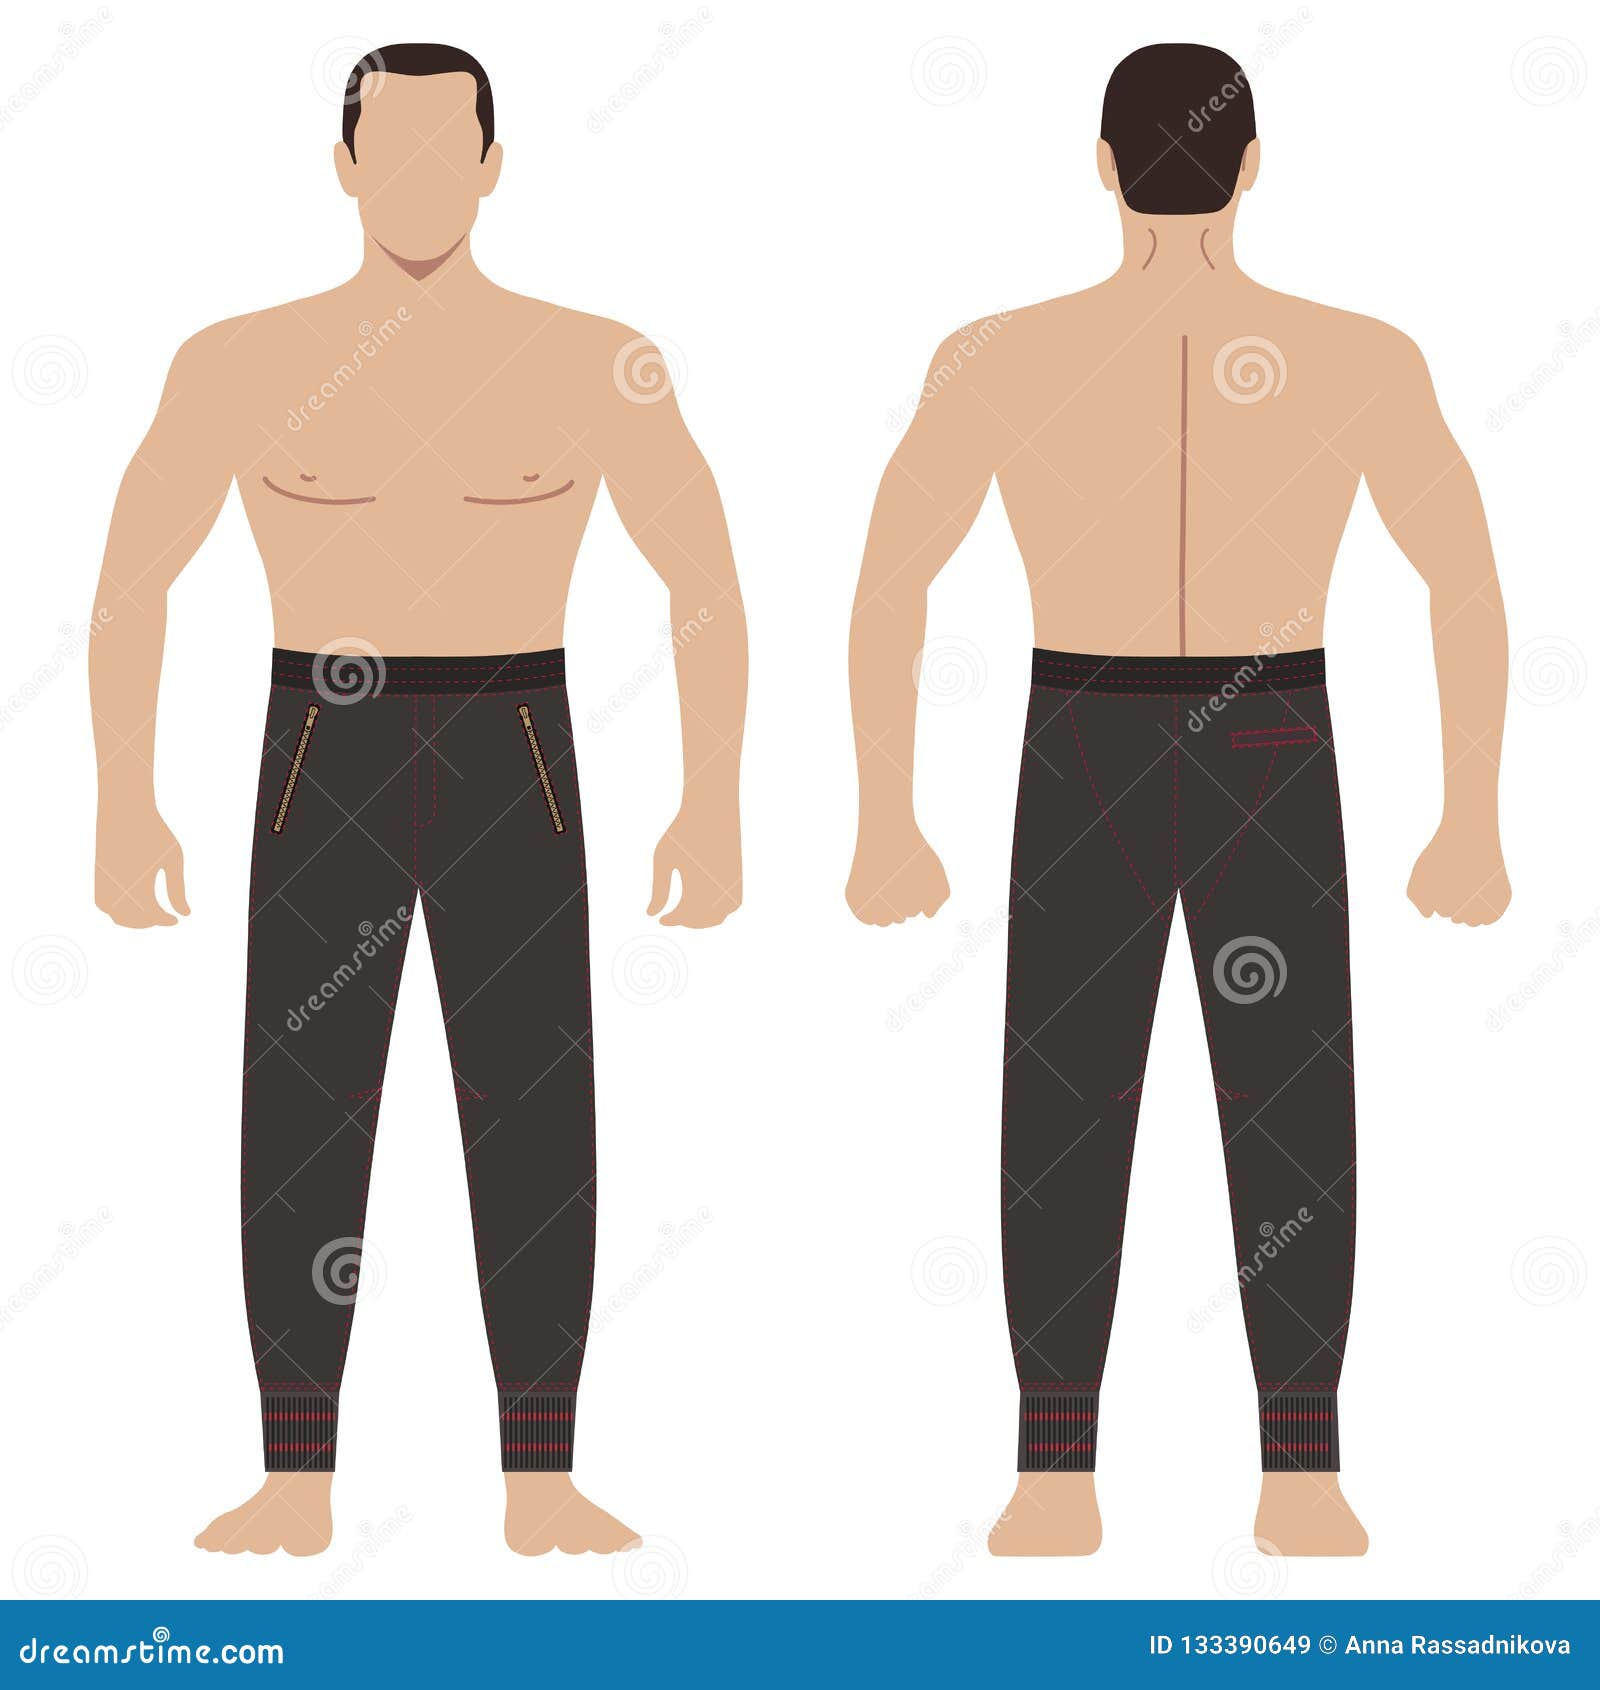 Download Sweatpants Man Template Front, Back Views Stock Vector ...